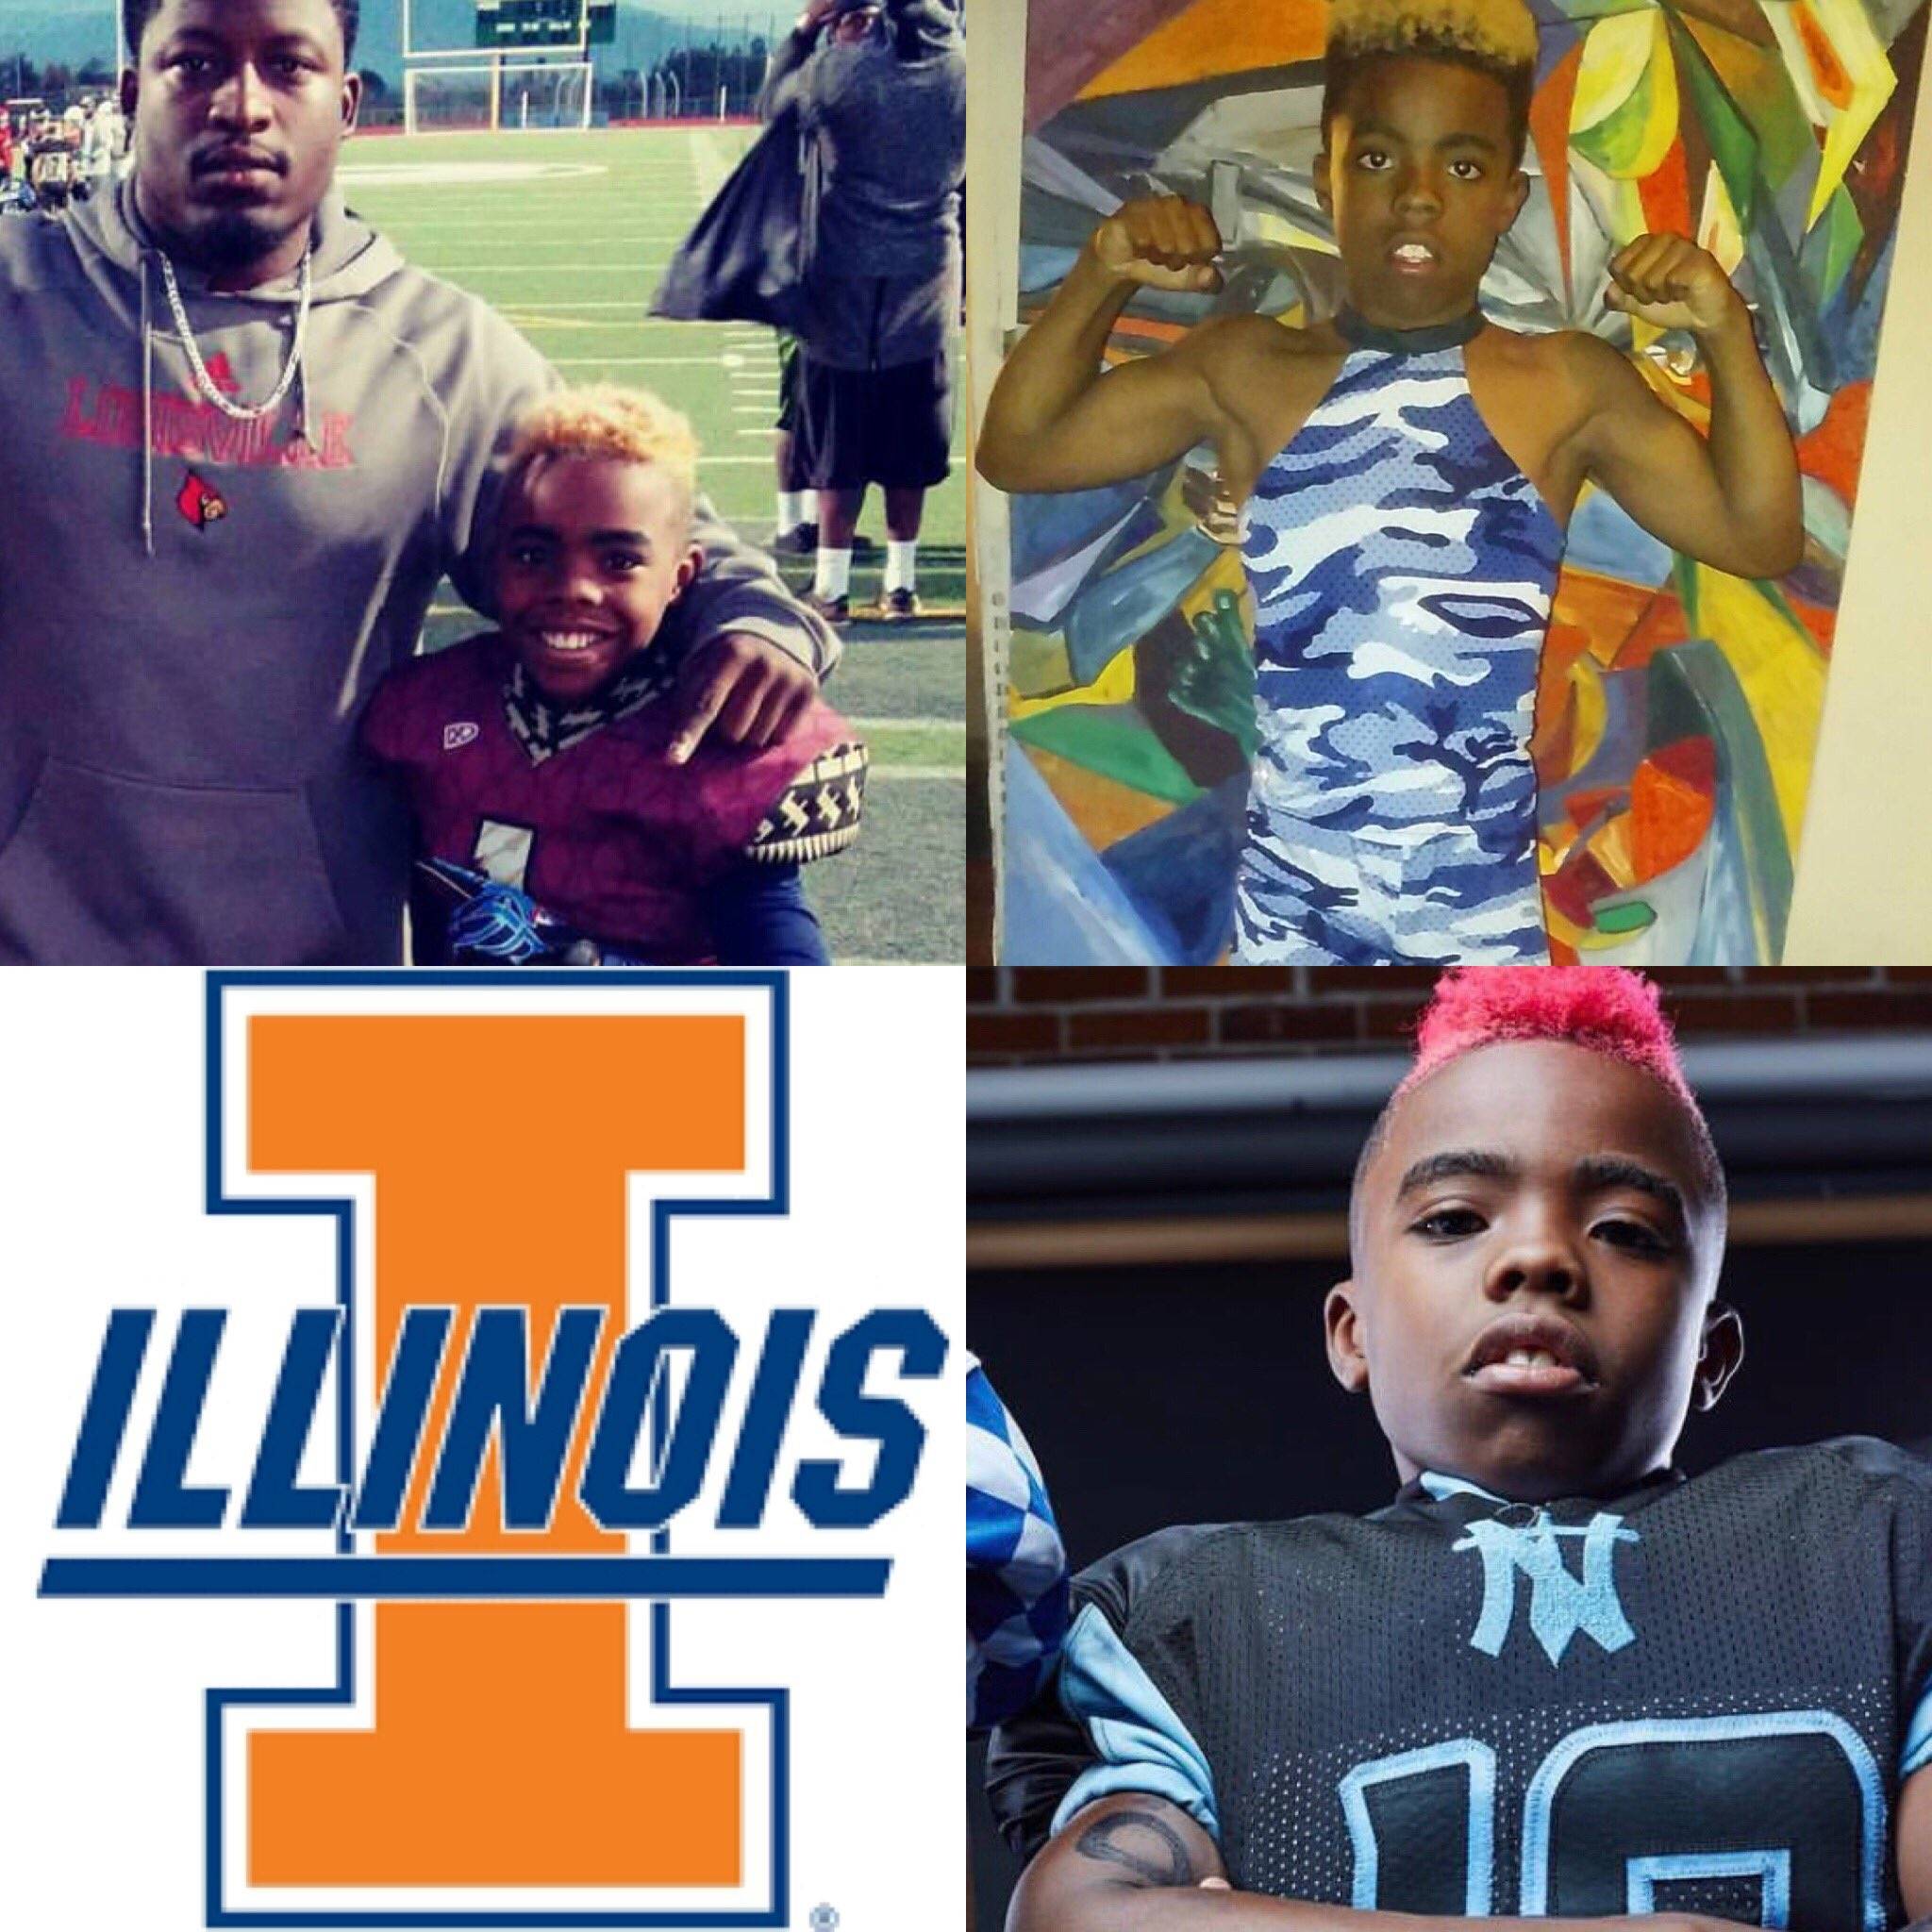 Illinois Football just offered a scholarship to a 10 year old